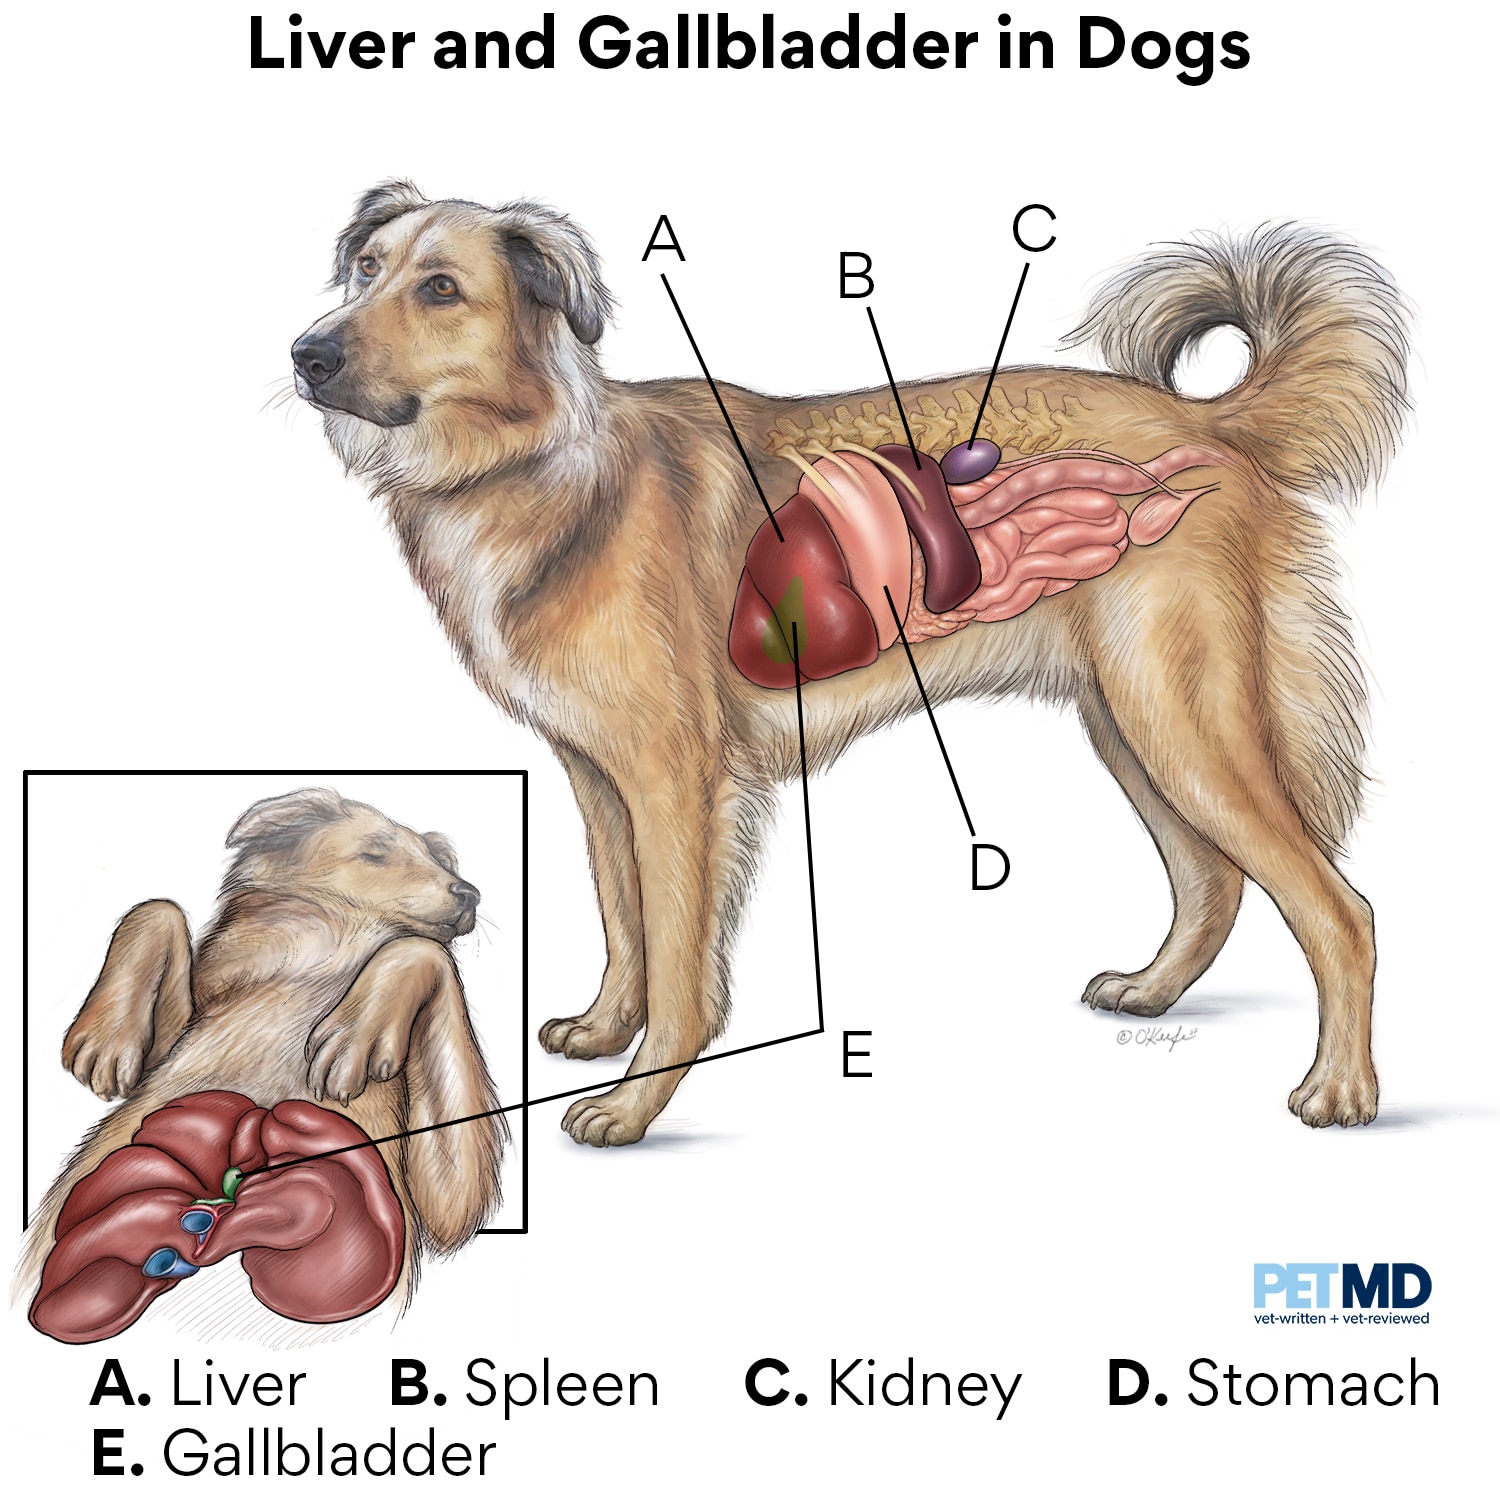 Liver and gallbladder in dogs